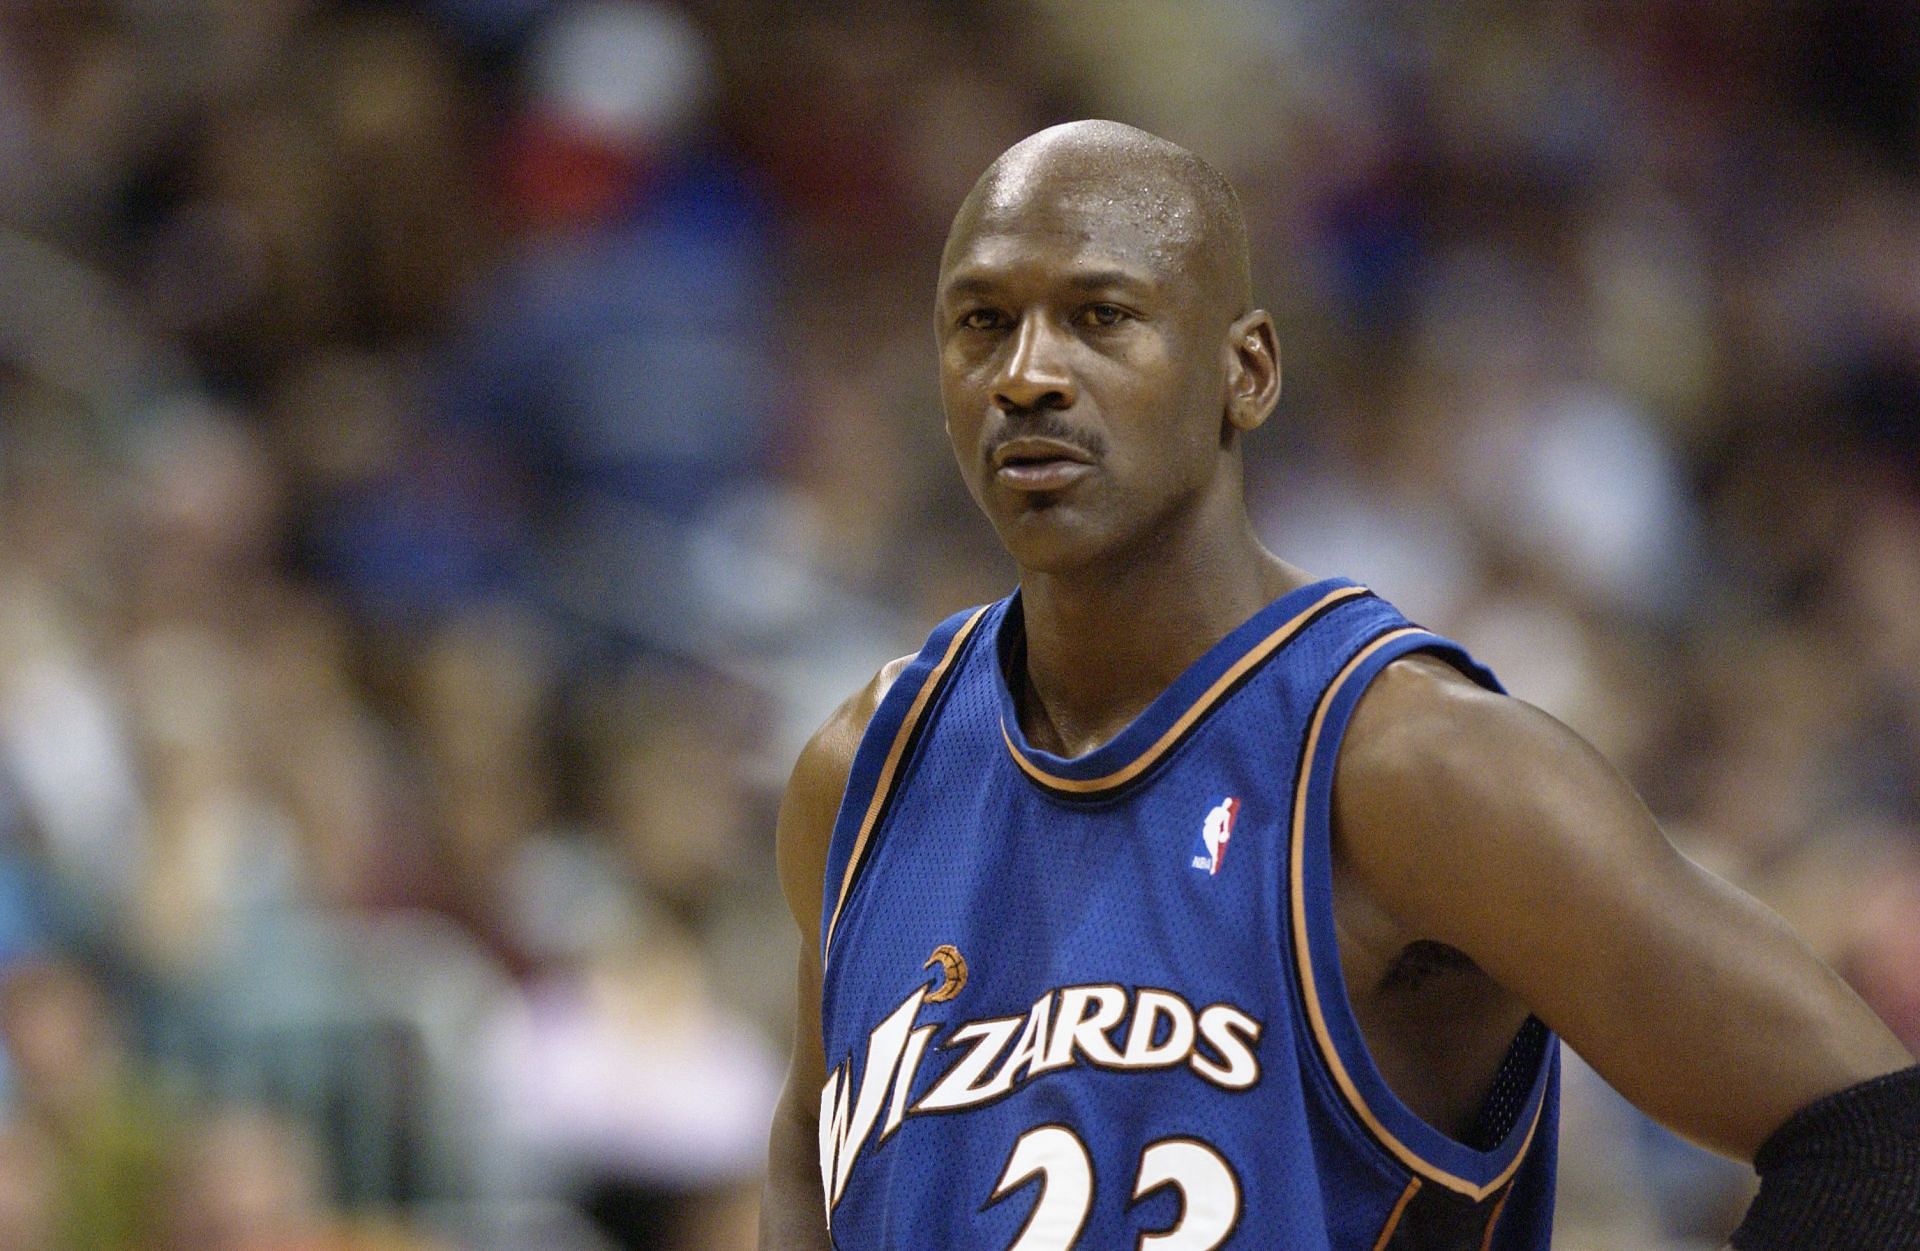 Michael Jordan during his time with the Washington Wizards